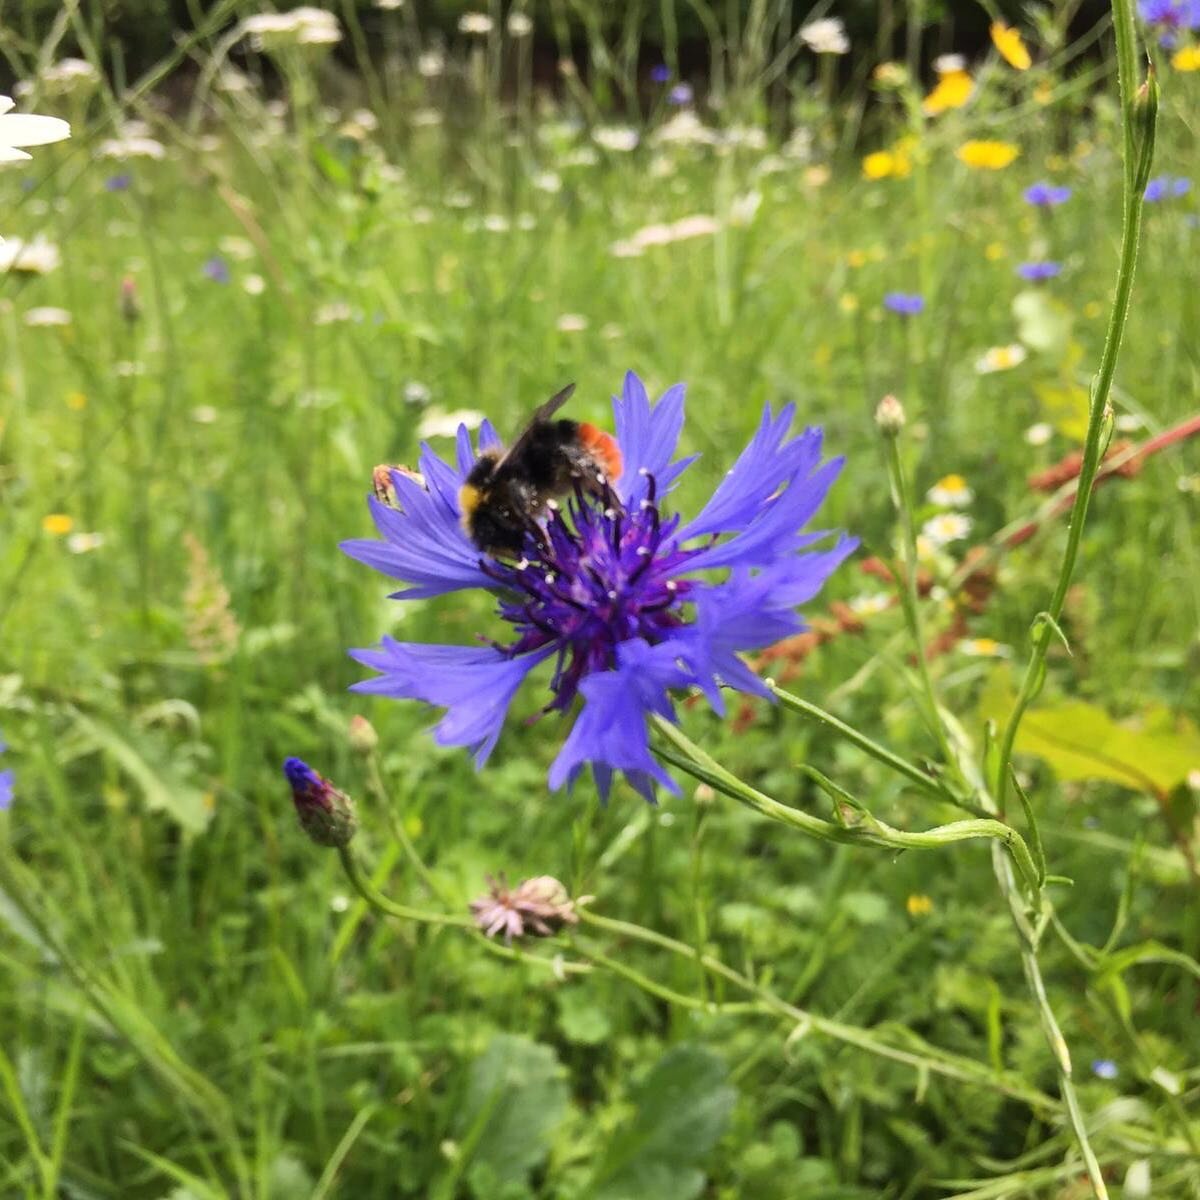 A bumbling bee enjoying the new wildflower patch in our garden last week. 🐝

#deanscourt #wimborne #wimborneminster #dorset #dorsetnature #swisbest #nature #biodiversity #insect #insectsofinstagram #insectlovers #countryside #naturephotography #butt